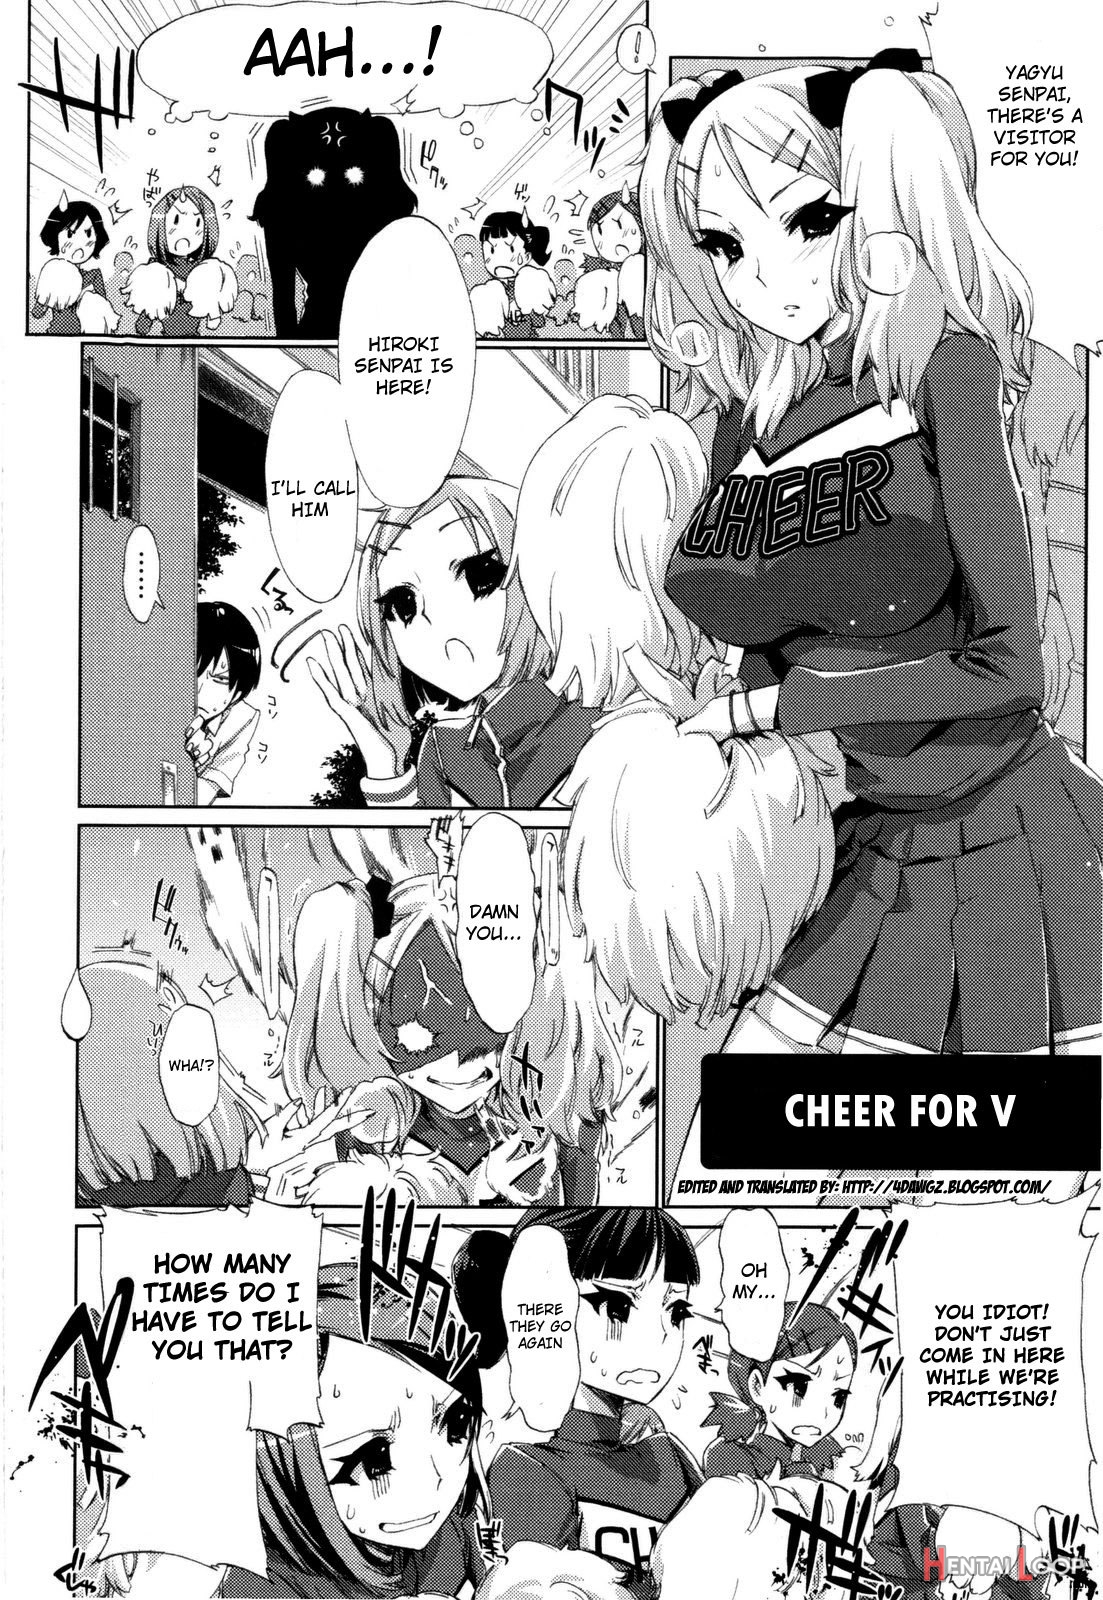 Cheerism page 10